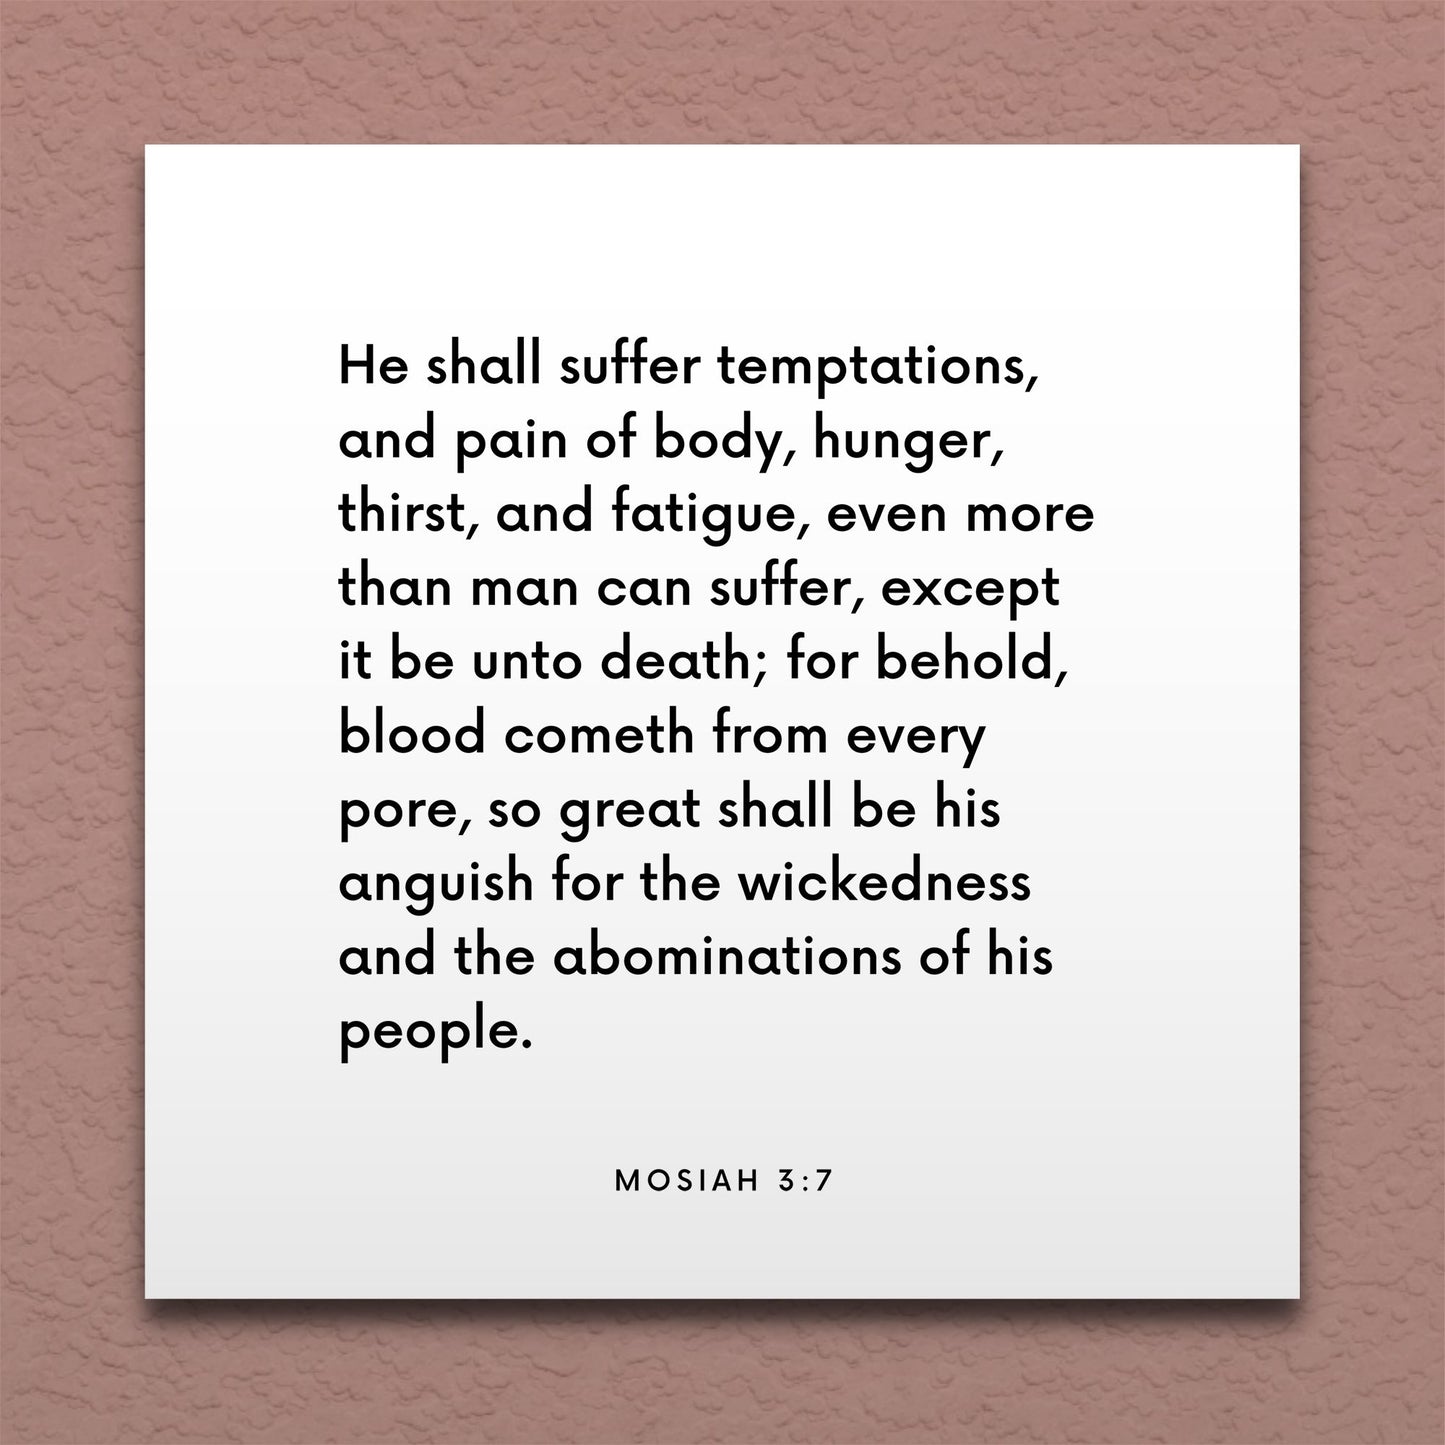 Wall-mounted scripture tile for Mosiah 3:7 - "He shall suffer temptations, and pain of body"